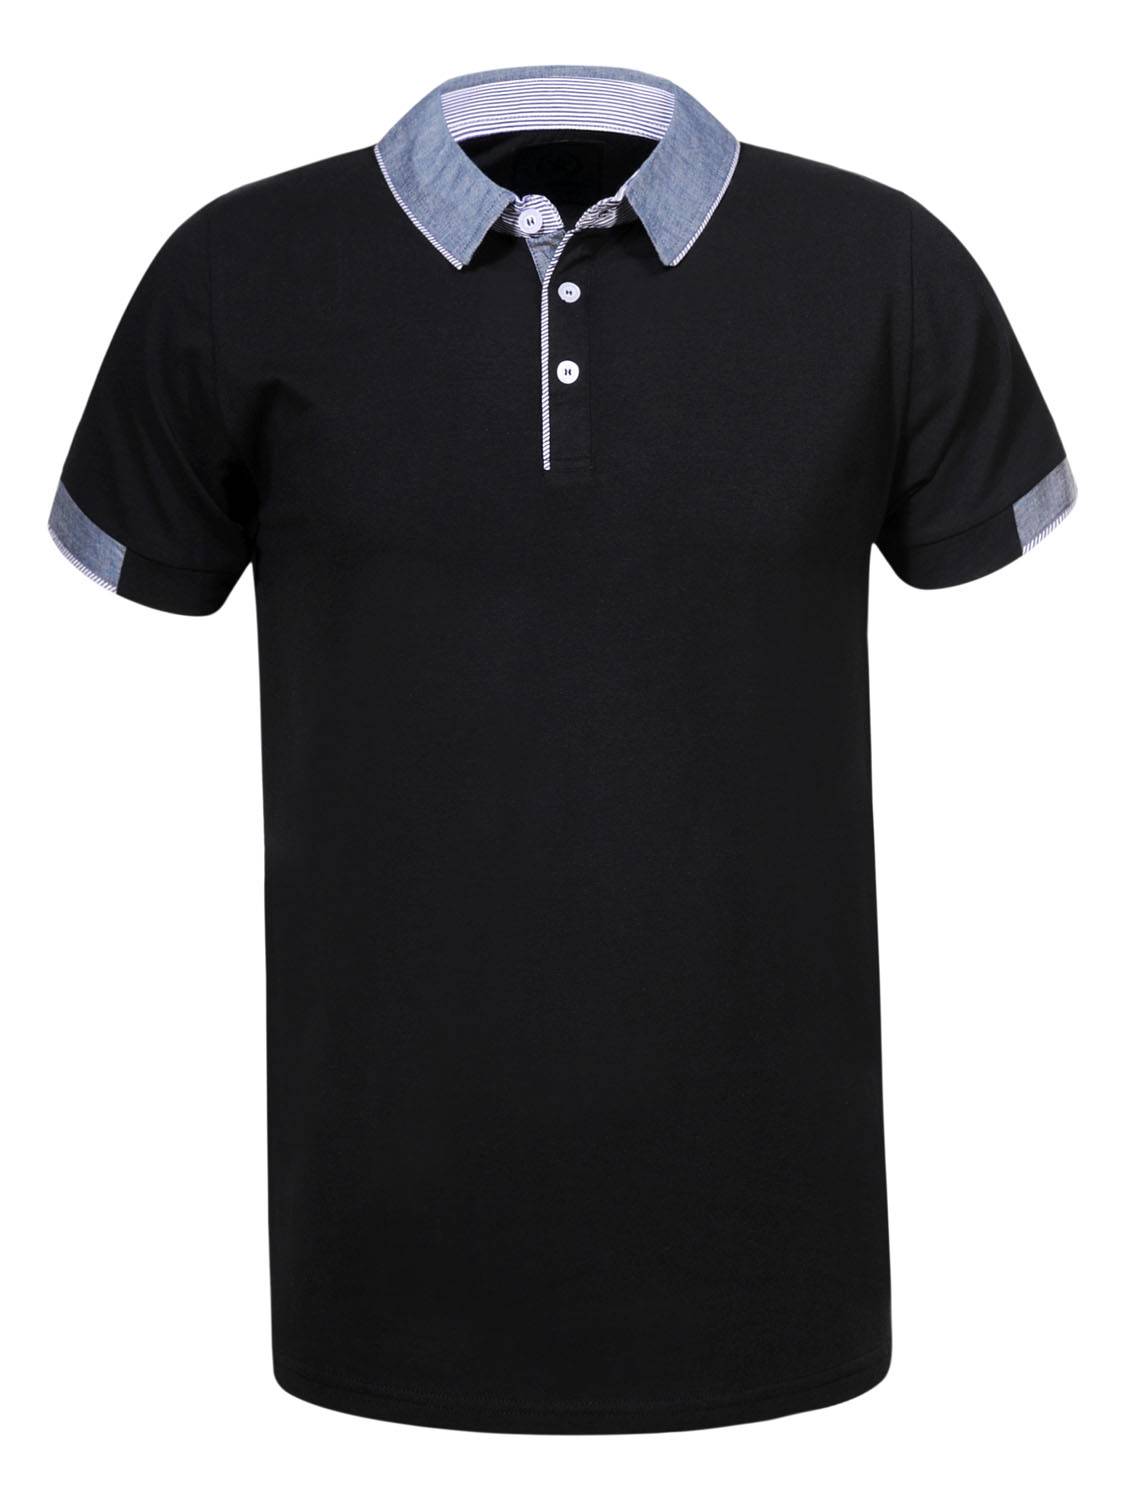 Plus size Men's Knitted Short Sleeve Polo Shirt